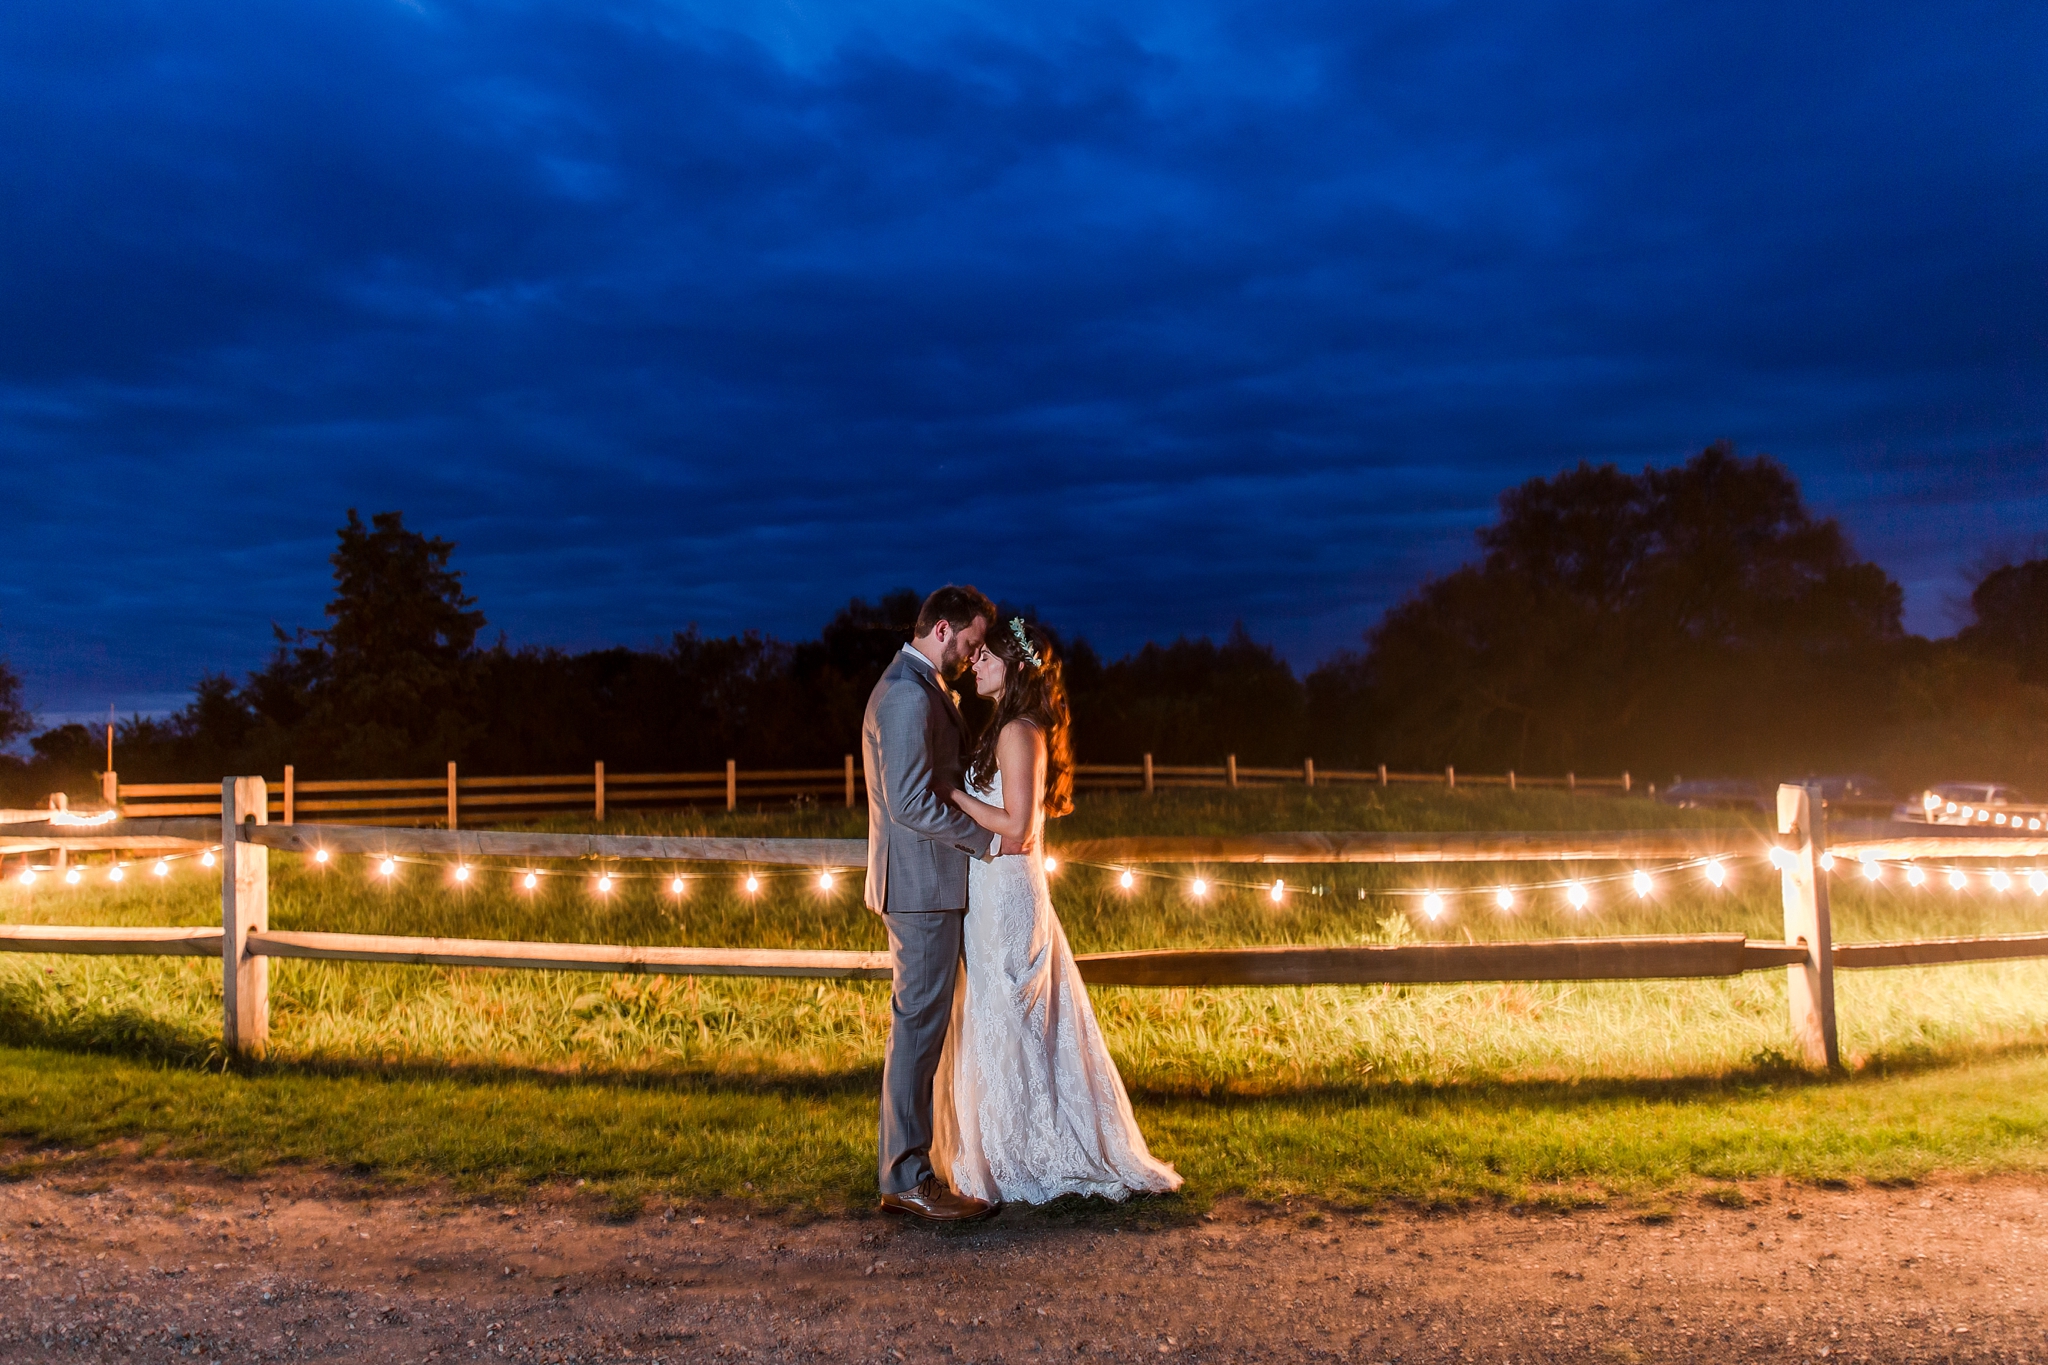 natural-rustic-wedding-photos-at-frutig-farms-the-valley-in-ann-arbor-michigan-by-courtney-carolyn-photography_0104.jpg